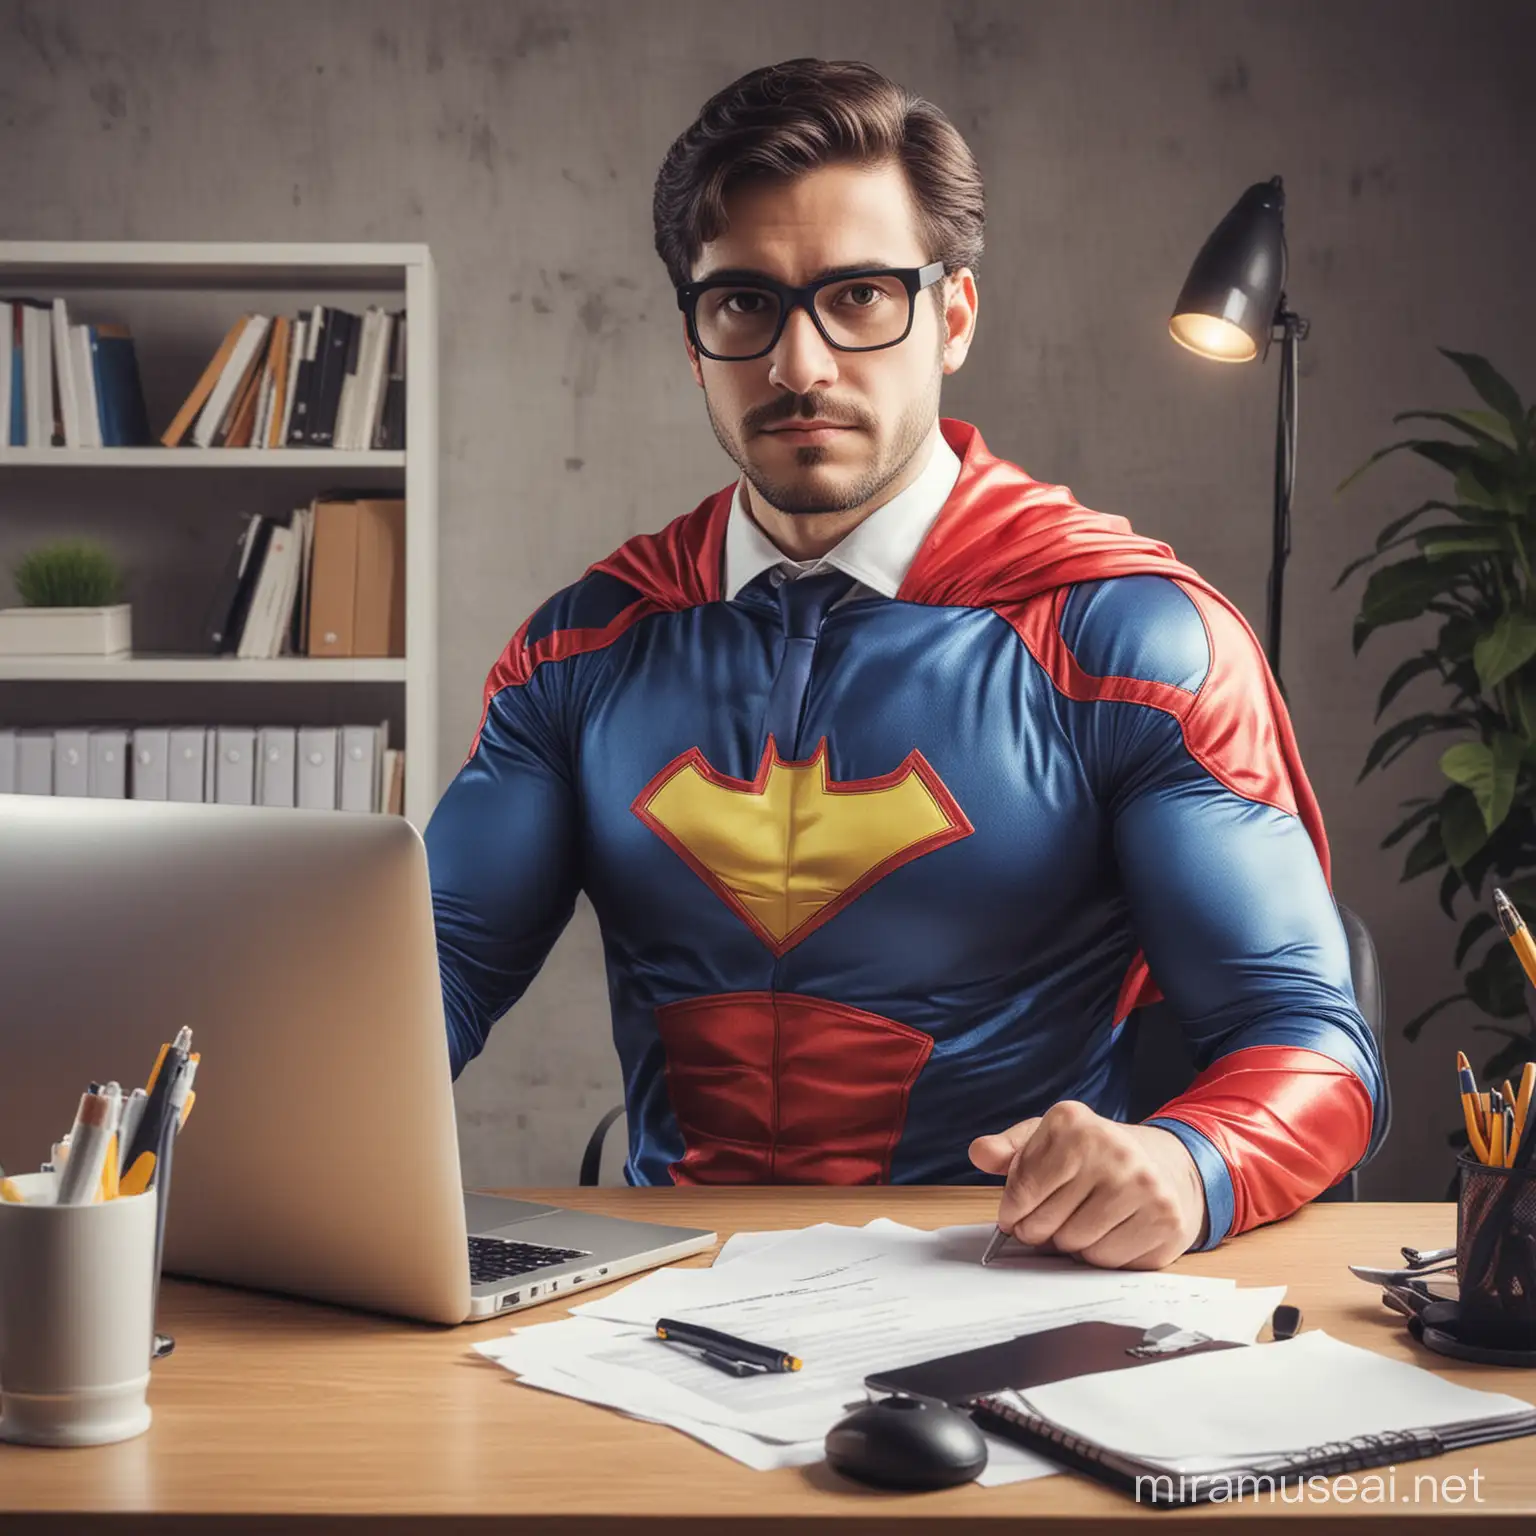 Professional Office Worker in Generic Superhero Suit at Workplace